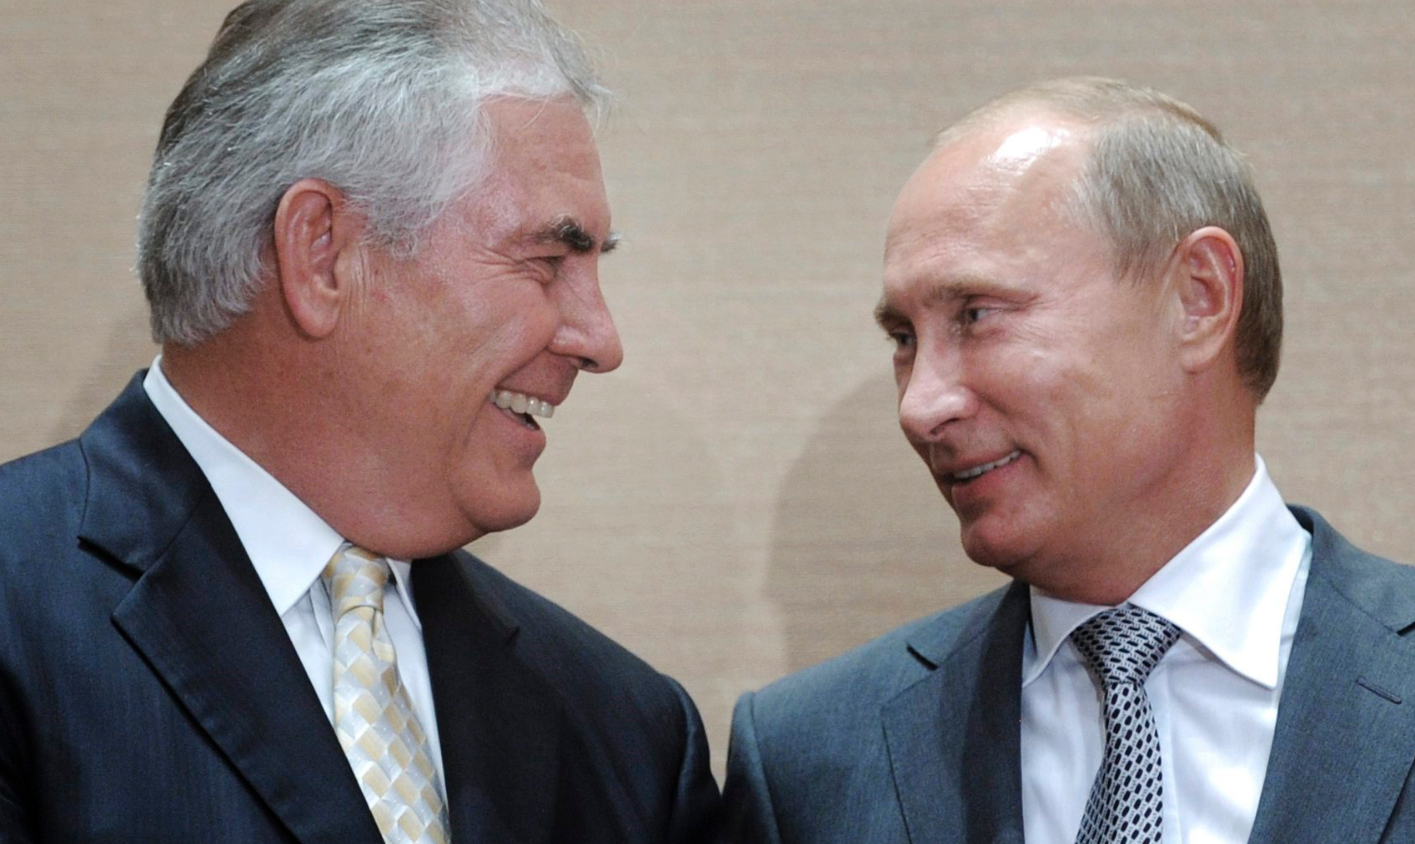 Russian Prime Minister Vladimir Putin, right, and Rex Tillerson, ExxonMobil's chief executive smile during a signing ceremony in the Black Sea resort of Sochi, Russia in this Aug. 30, 2011, file photo. President-elect Donald Trump selected ExxonMobil CEO Rex Tillerson to lead the State Department on Monday, Dec. 12, 2016. (Alexei Druzhinin/RIA Novosti via AP, Pool)